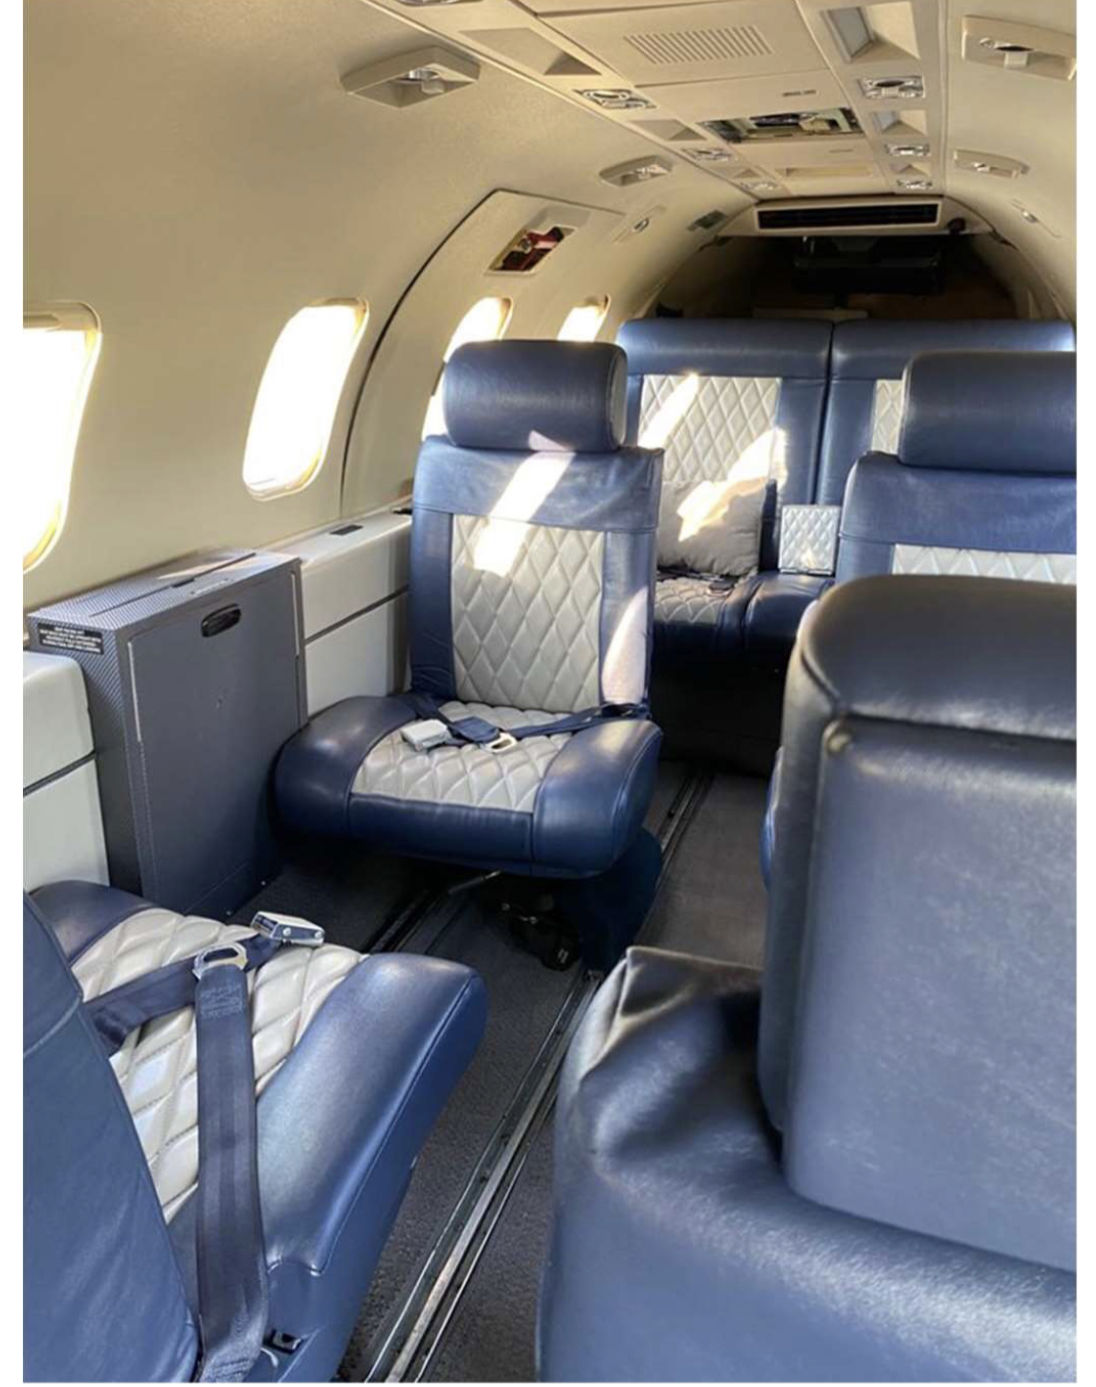 1985 Learjet 35A - Interior